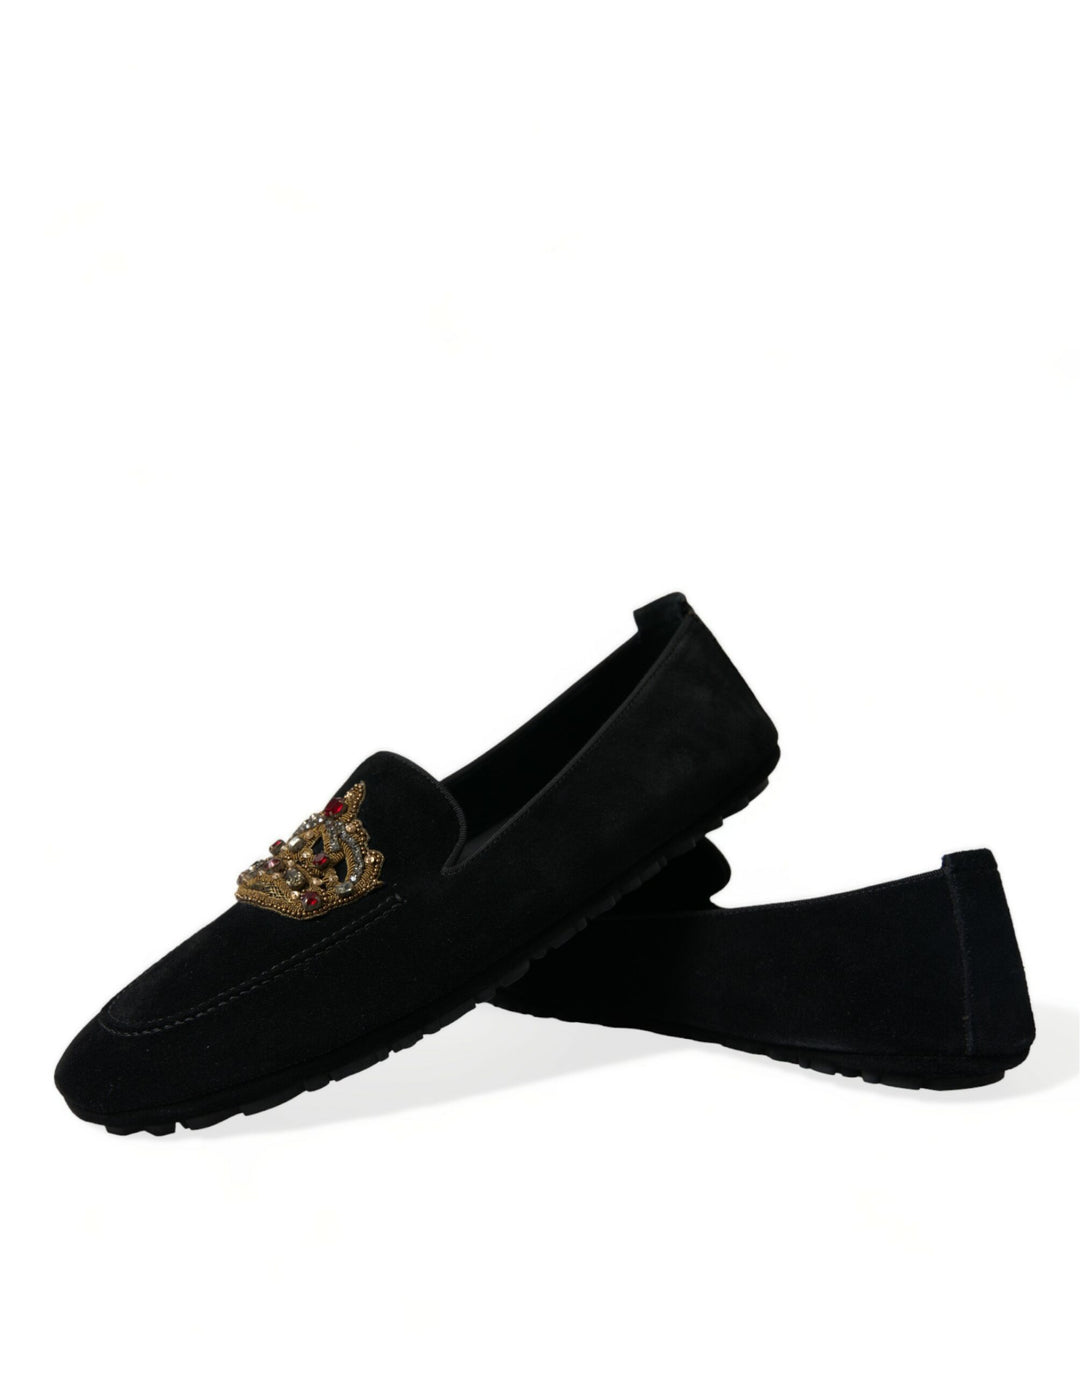 Dolce & Gabbana Black Calfskin Loafers with Crystals